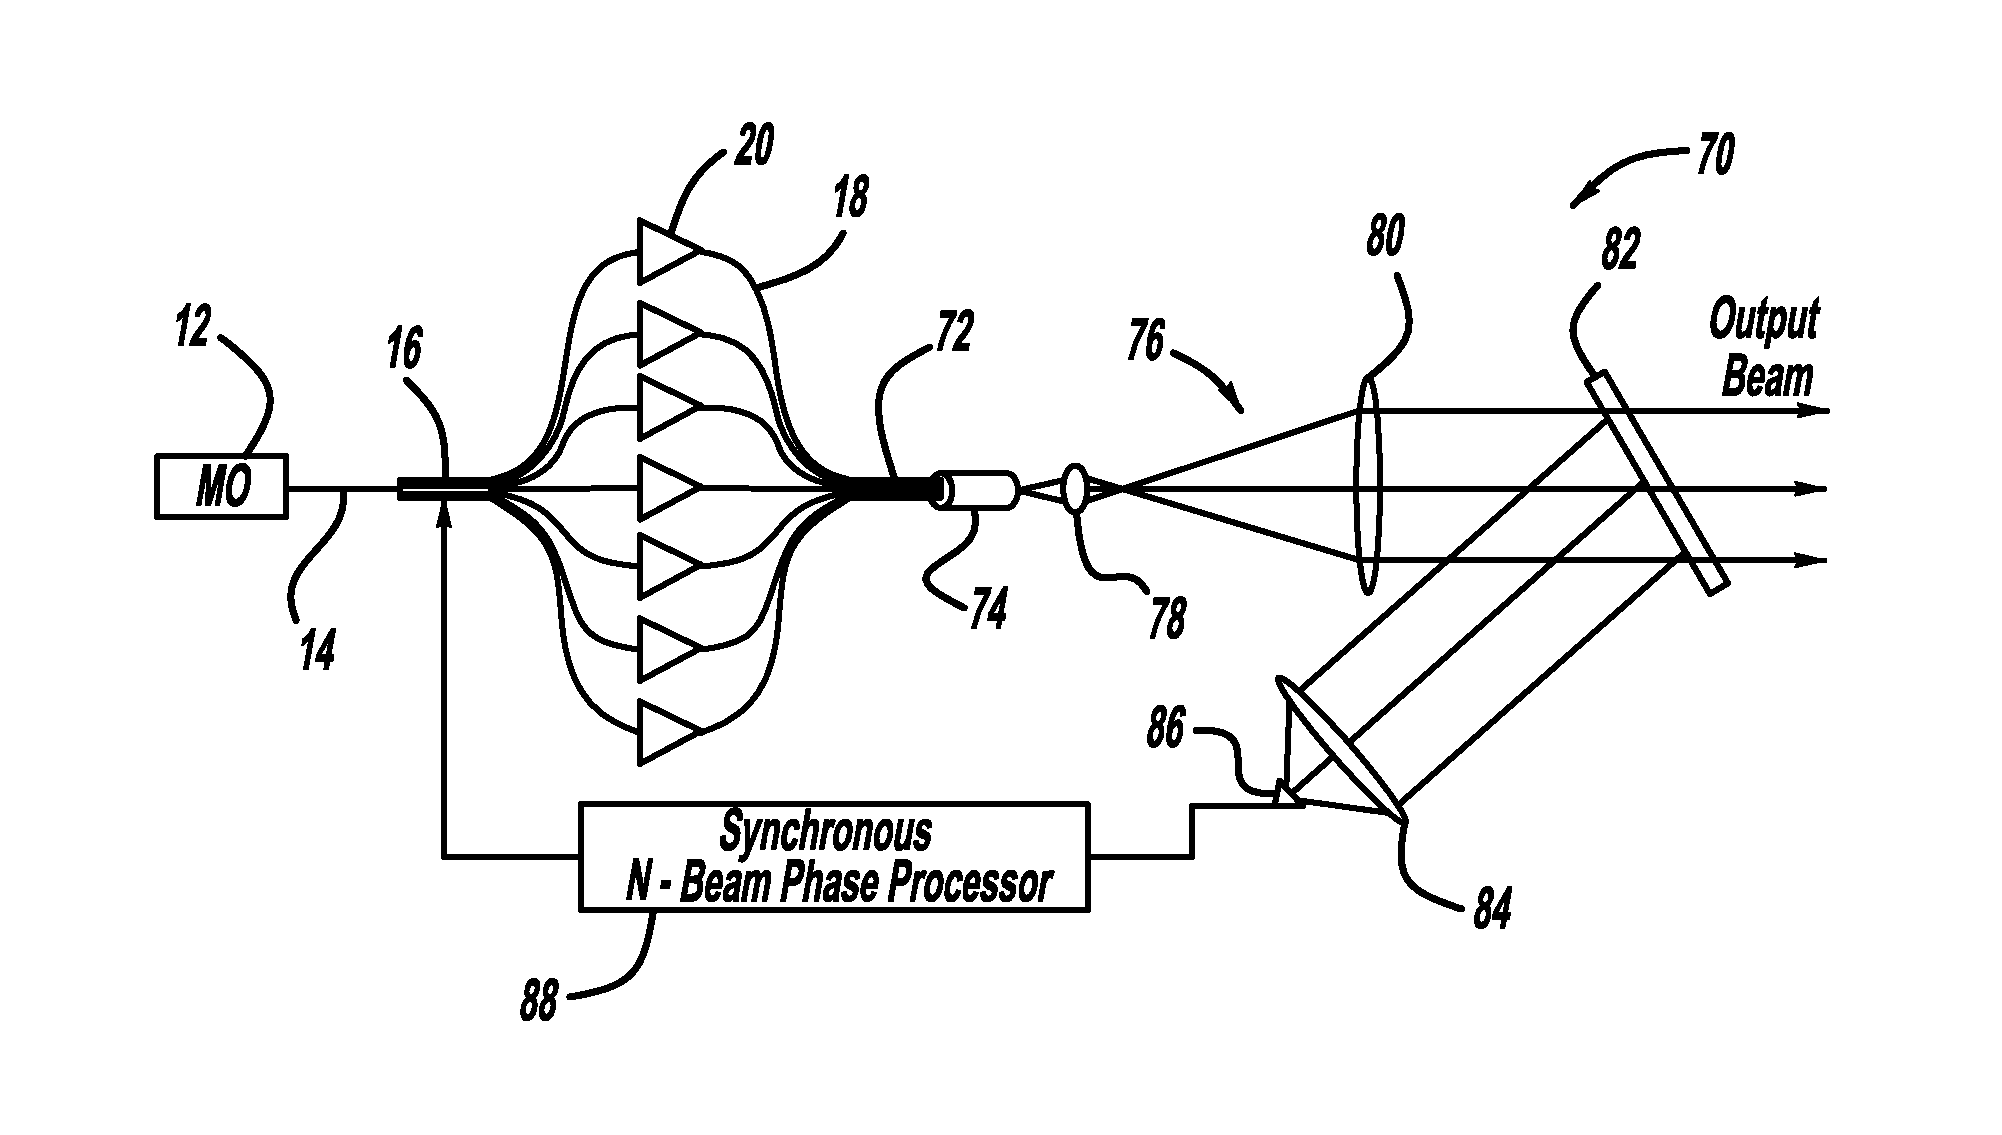 Multi-channel fiber laser amplifier combining apparatus including integrated spectral beam combination and a tapered fiber bundle having multiple fiber outputs